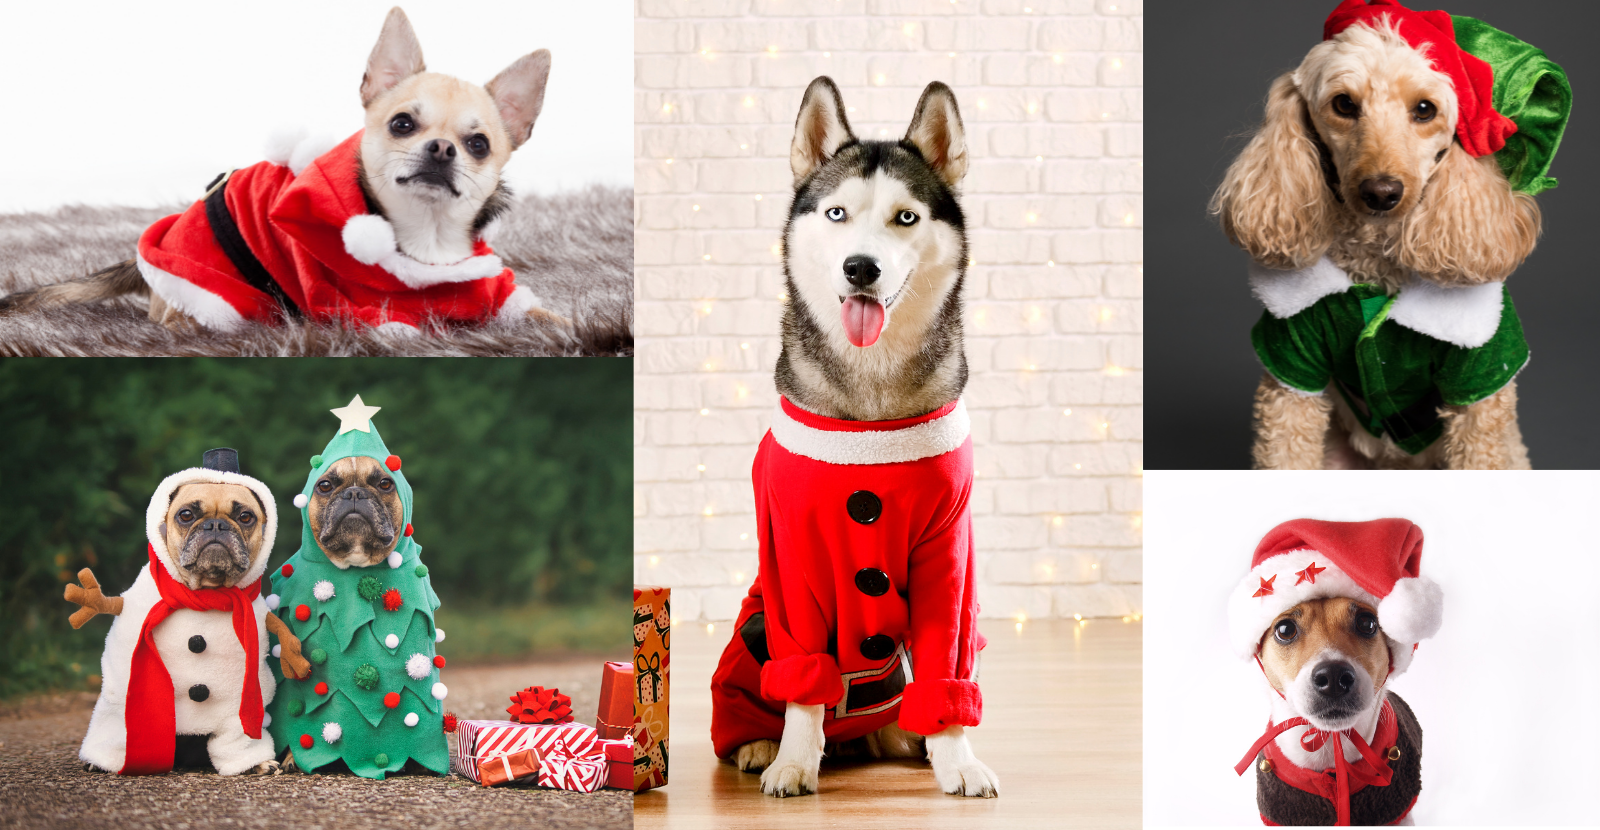 Christmas outfits on dogs